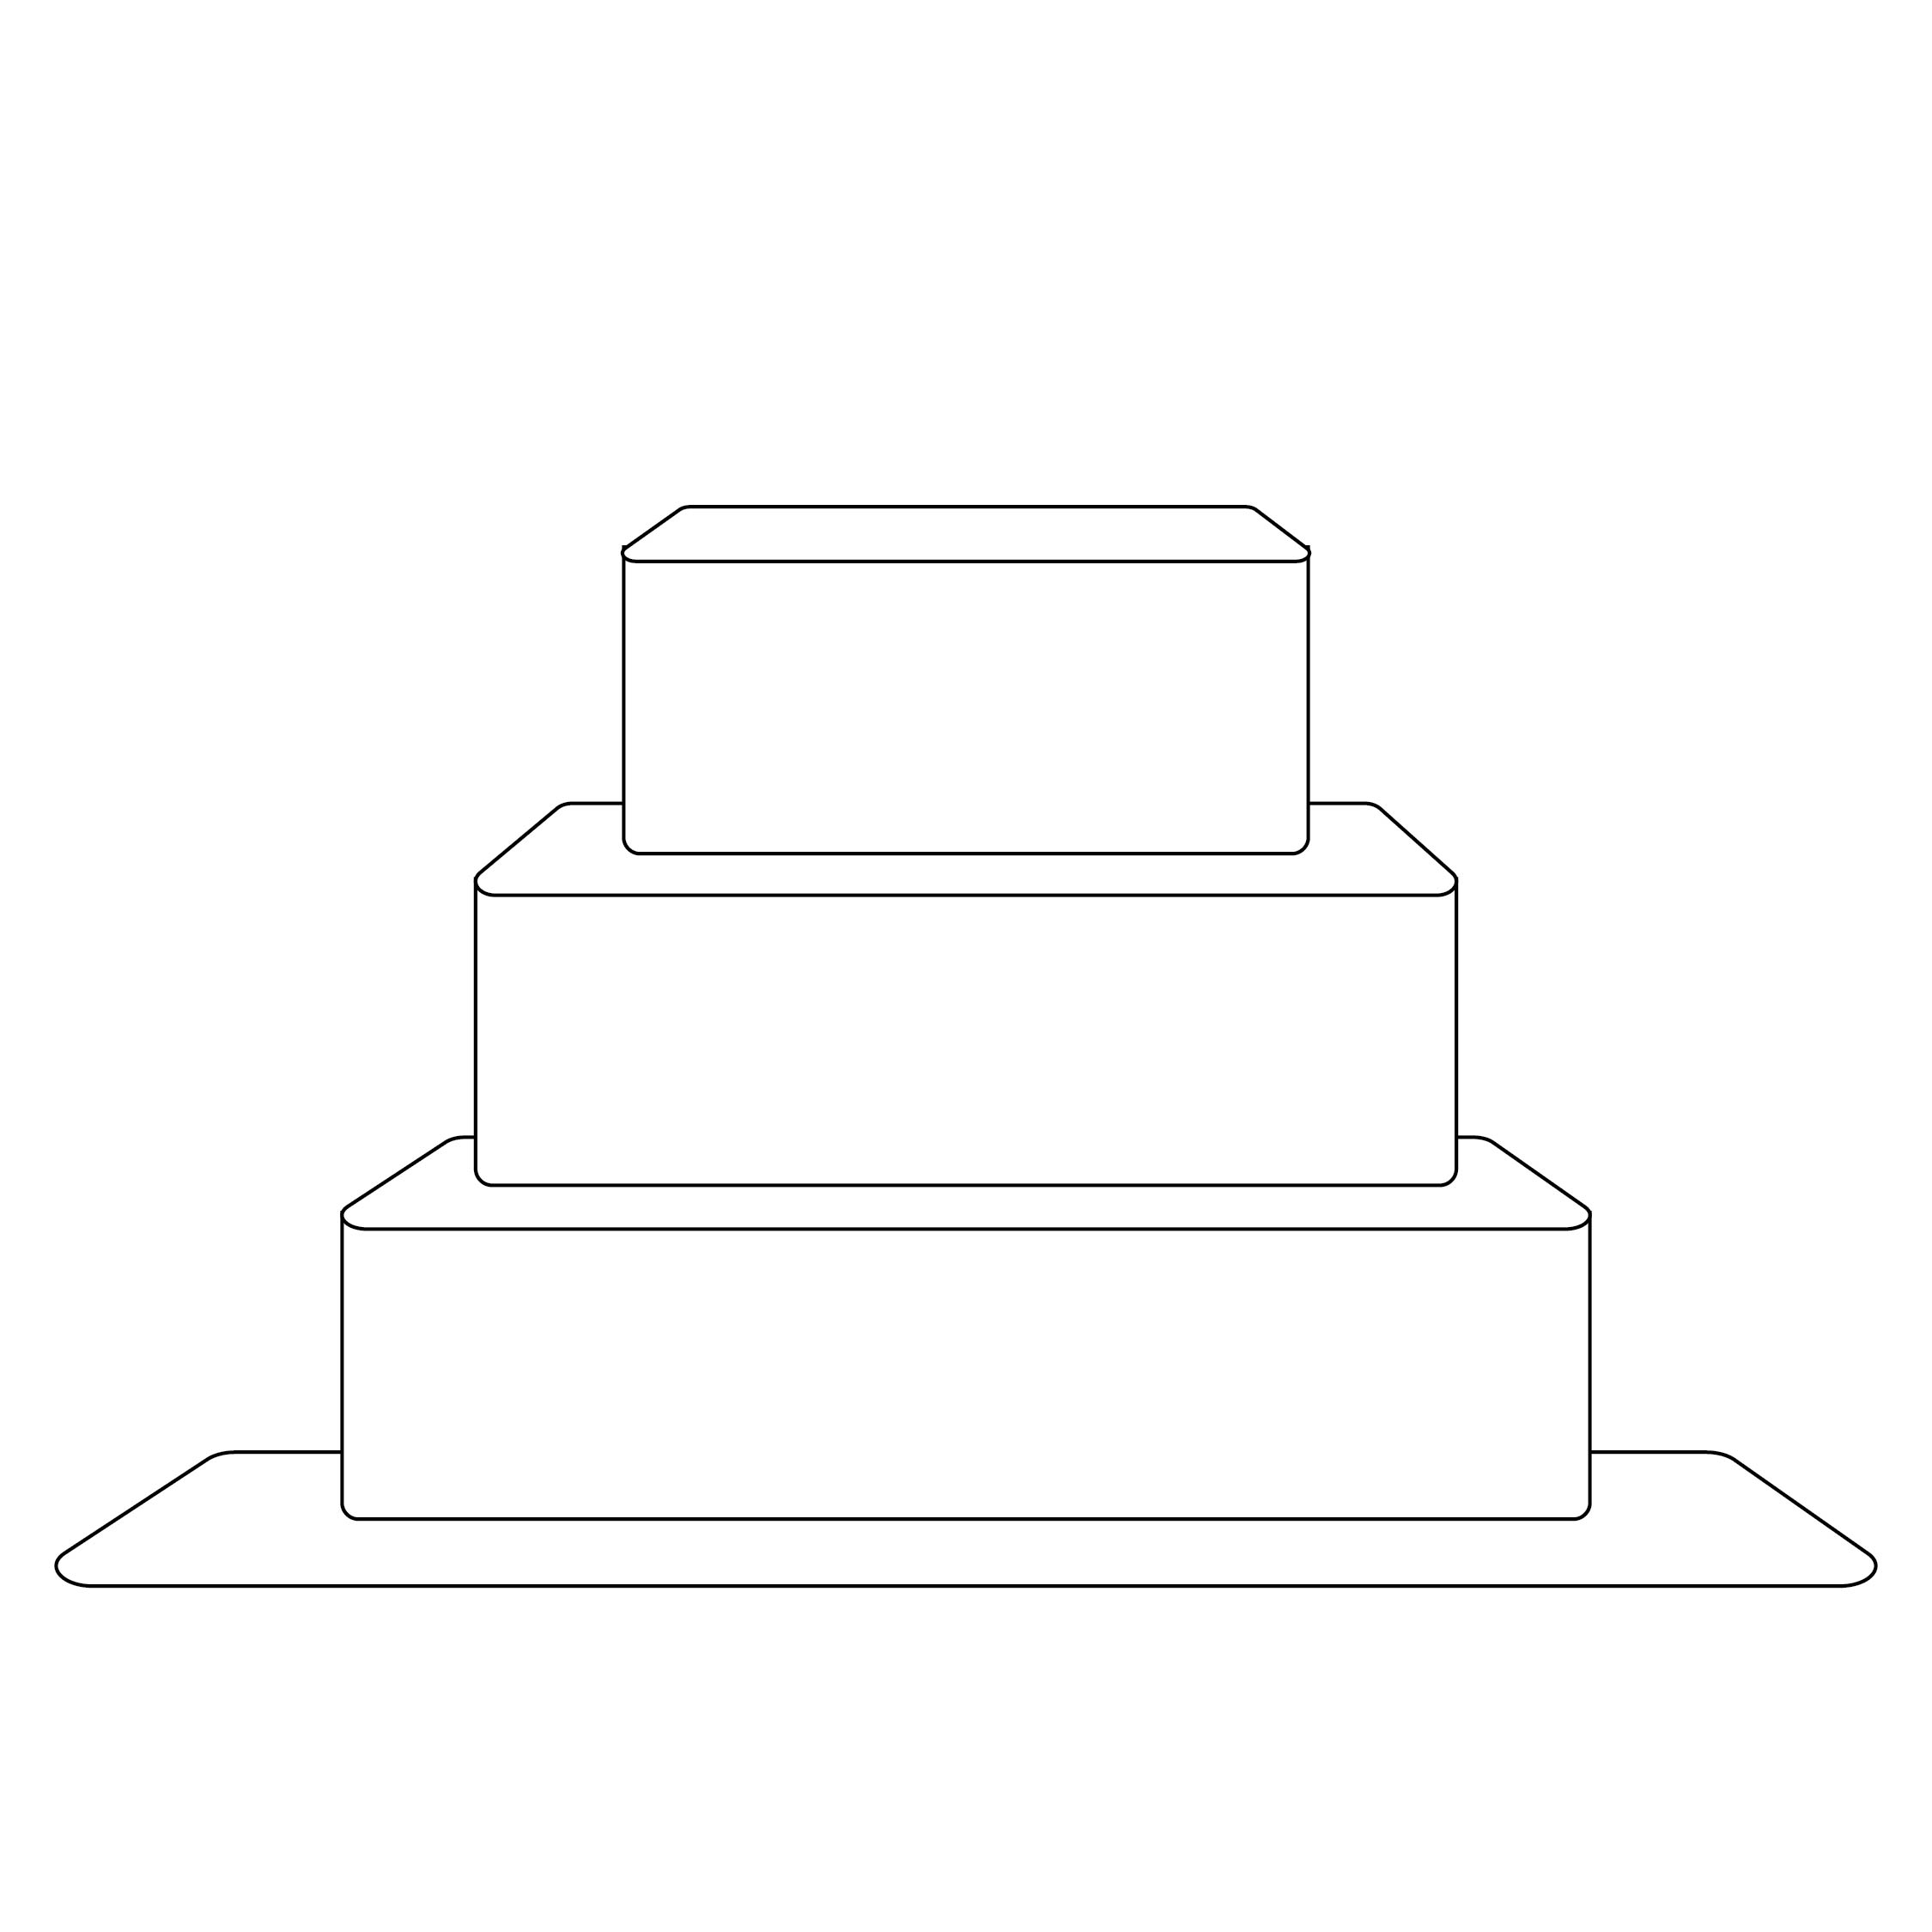 7 Best Images of Wedding Cake Template Printable 2 Tier Cake